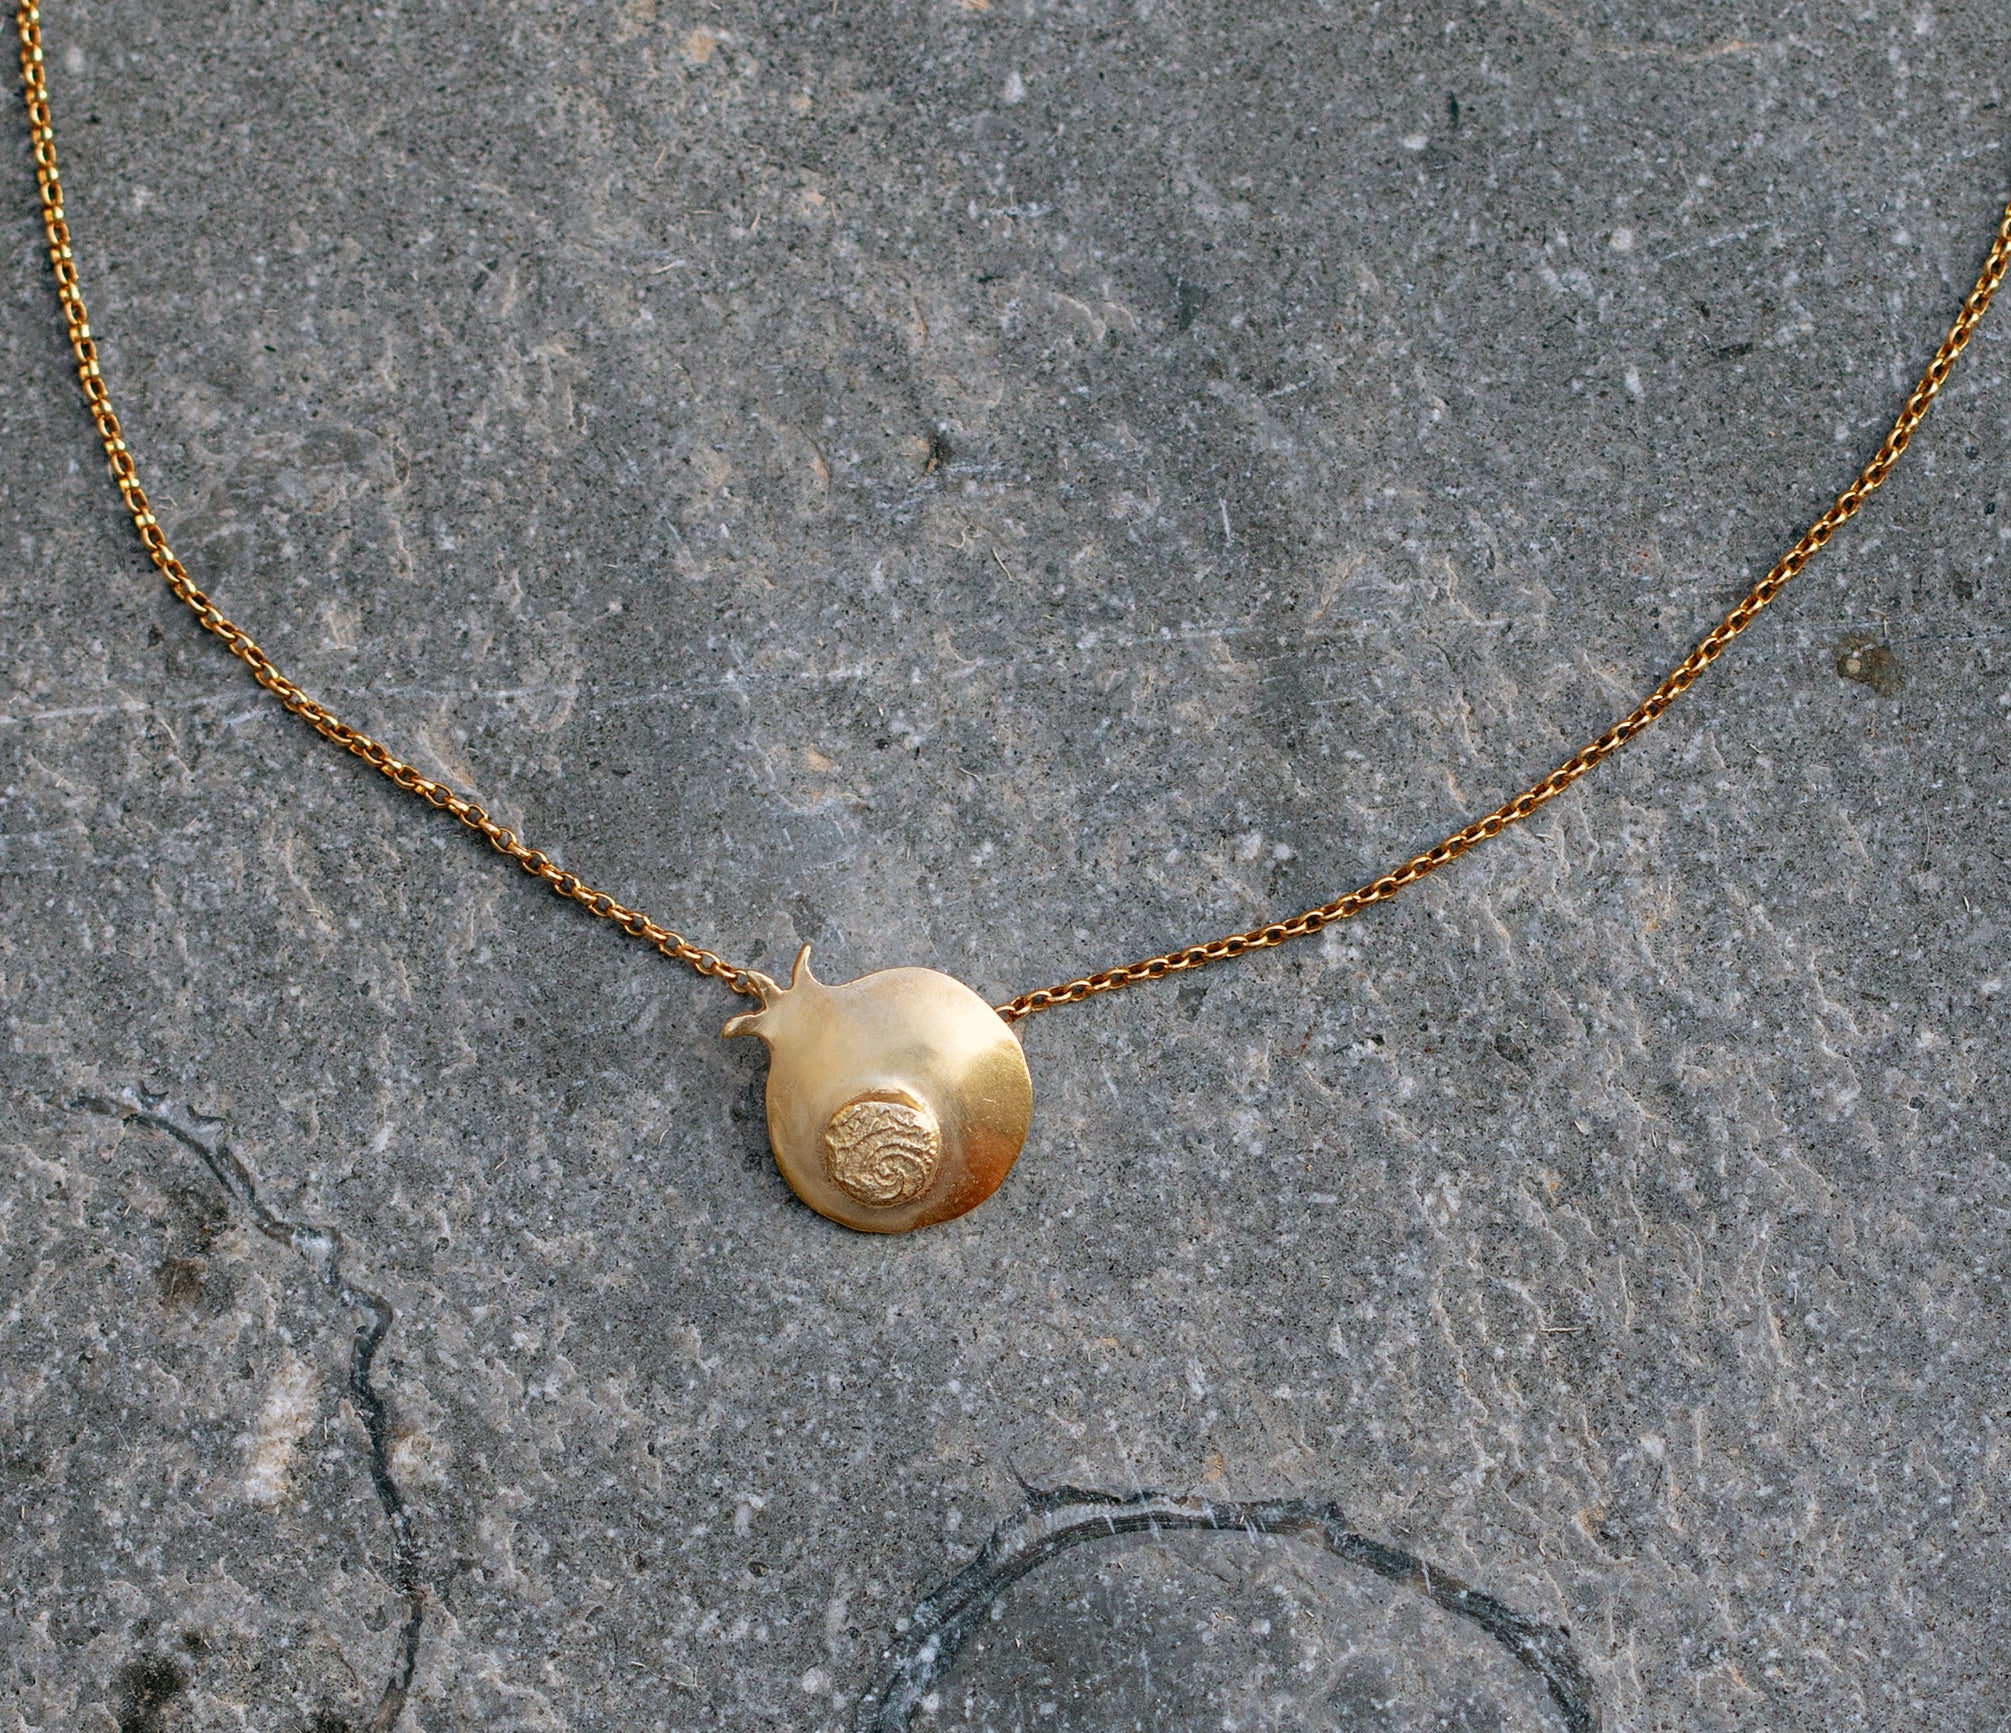 Gold Pomegranate Pendant Necklace. Hand Made Fashion Jewelry, Short Gold Pendant Necklaces